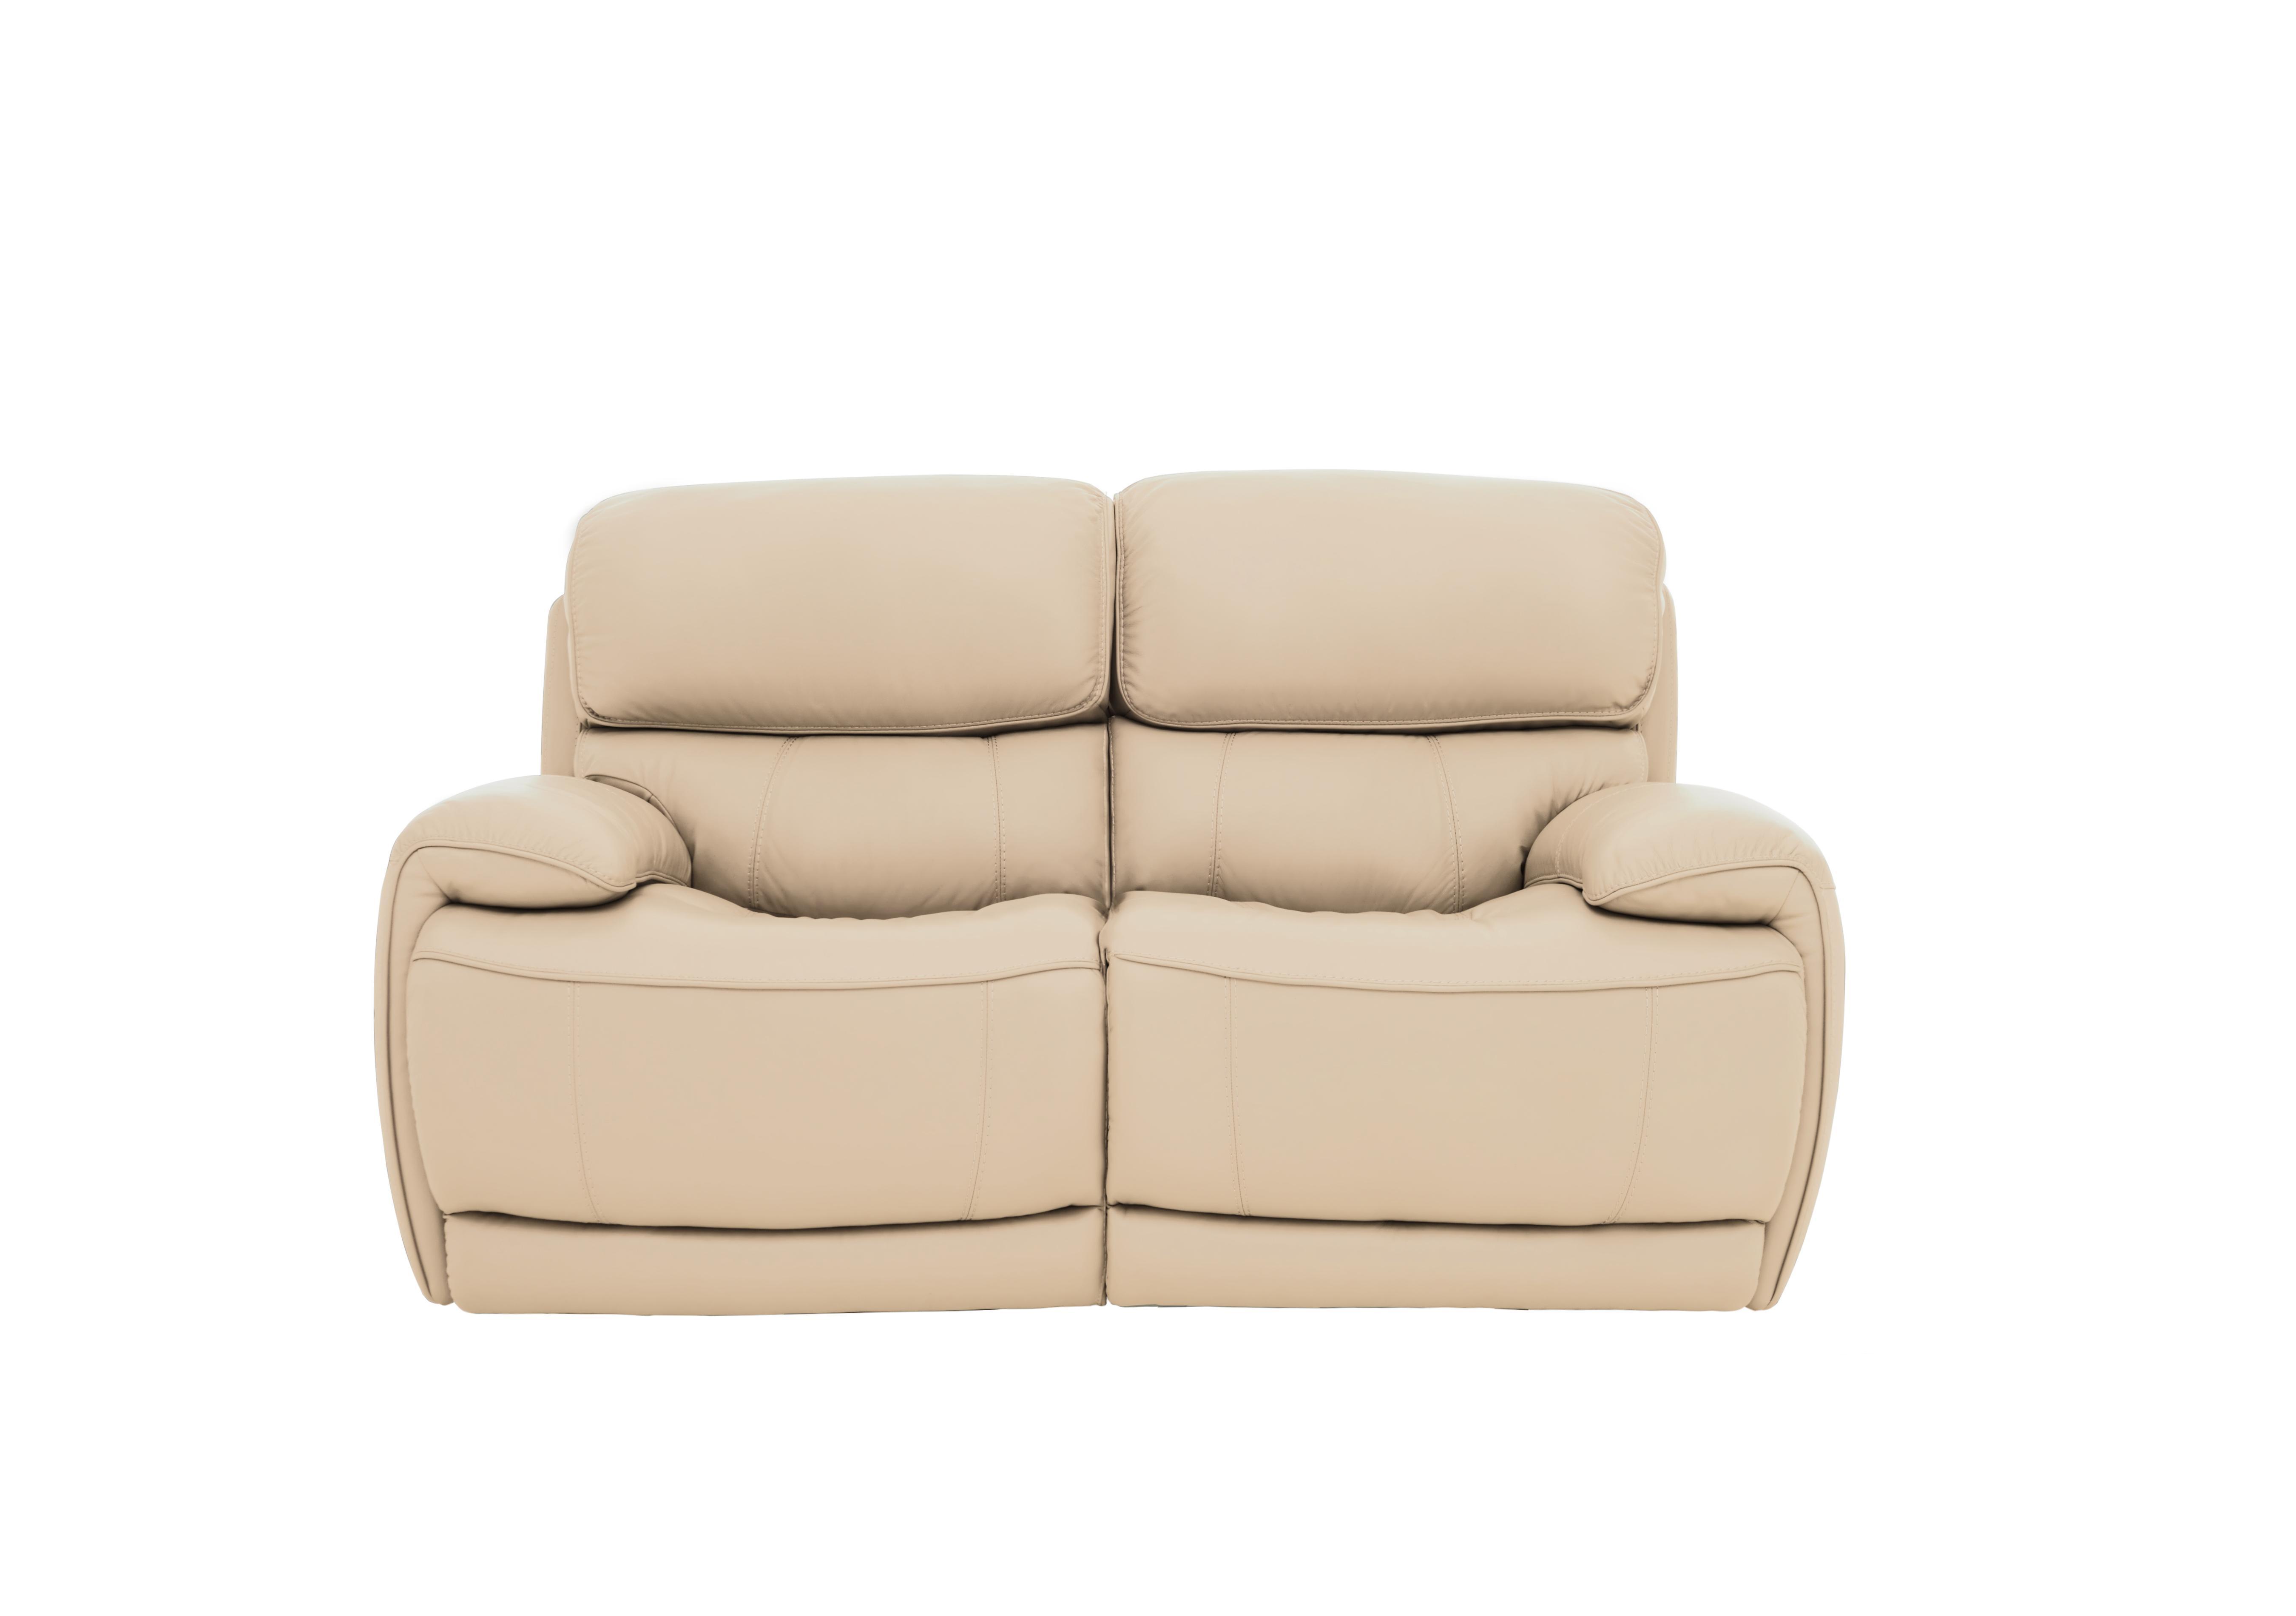 Rocco 2 Seater Leather Power Rocker Sofa with Power Headrests in Bv-862c Bisque on Furniture Village